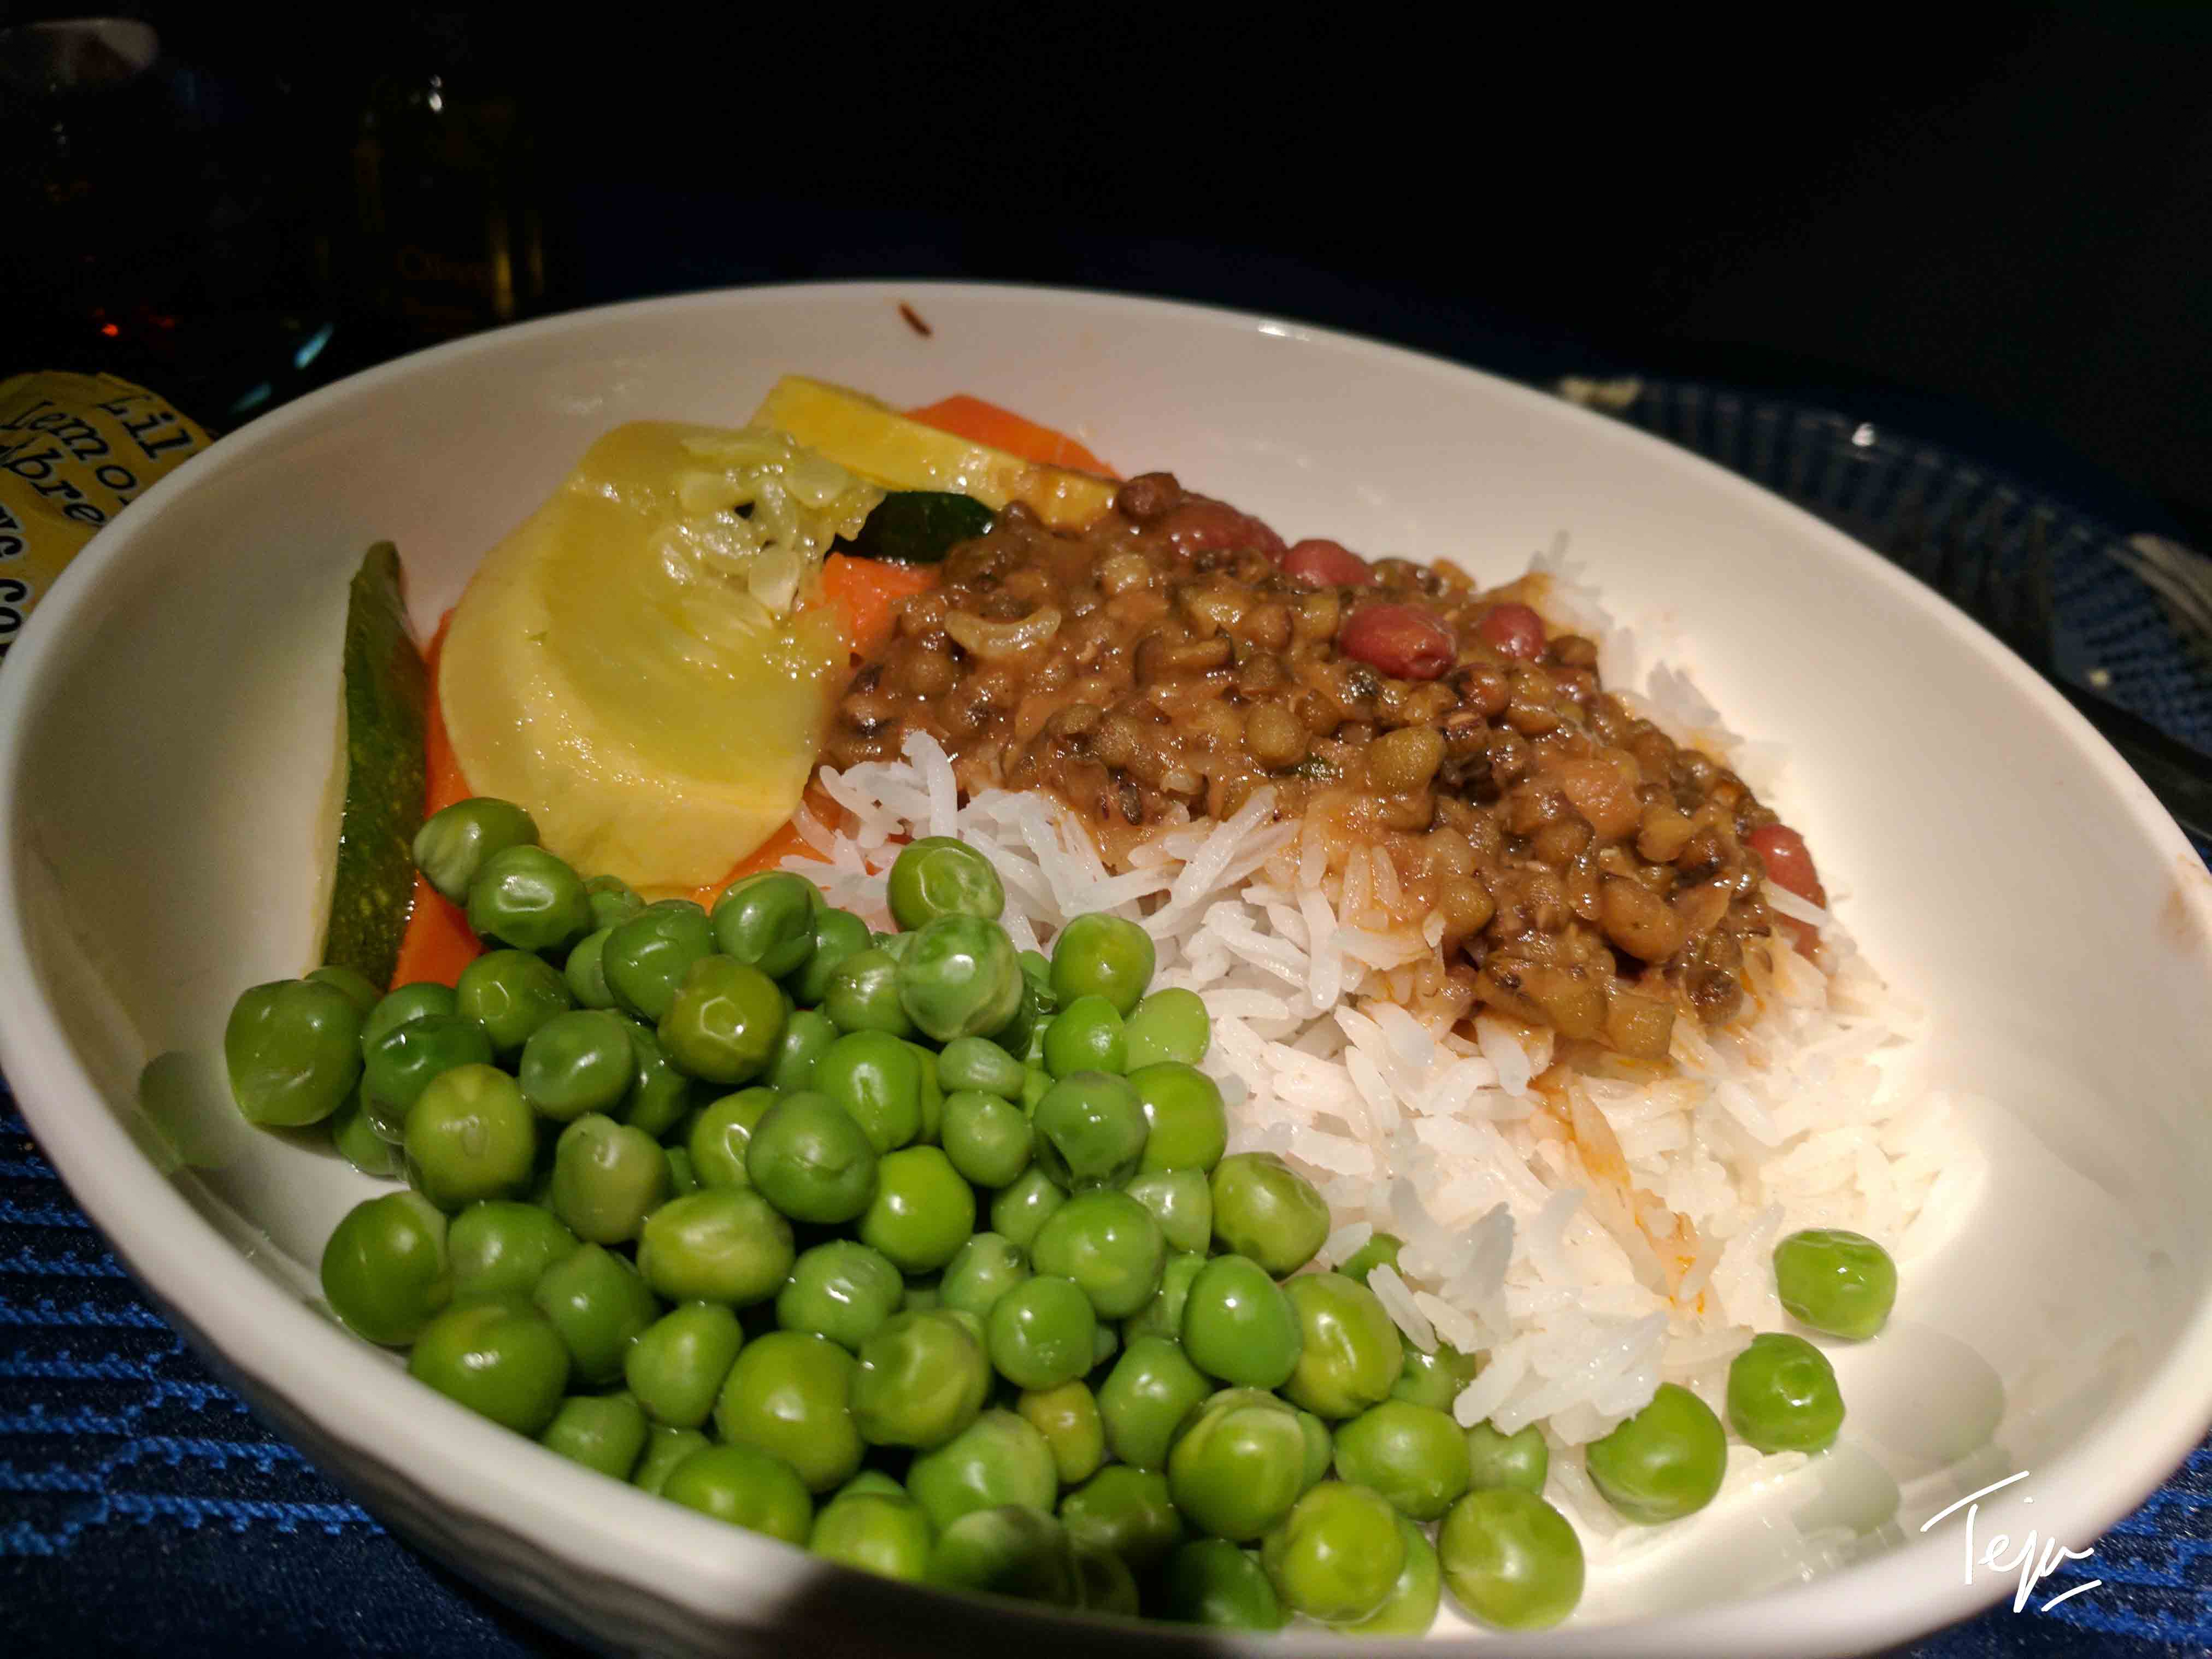 a bowl of food with peas and beans